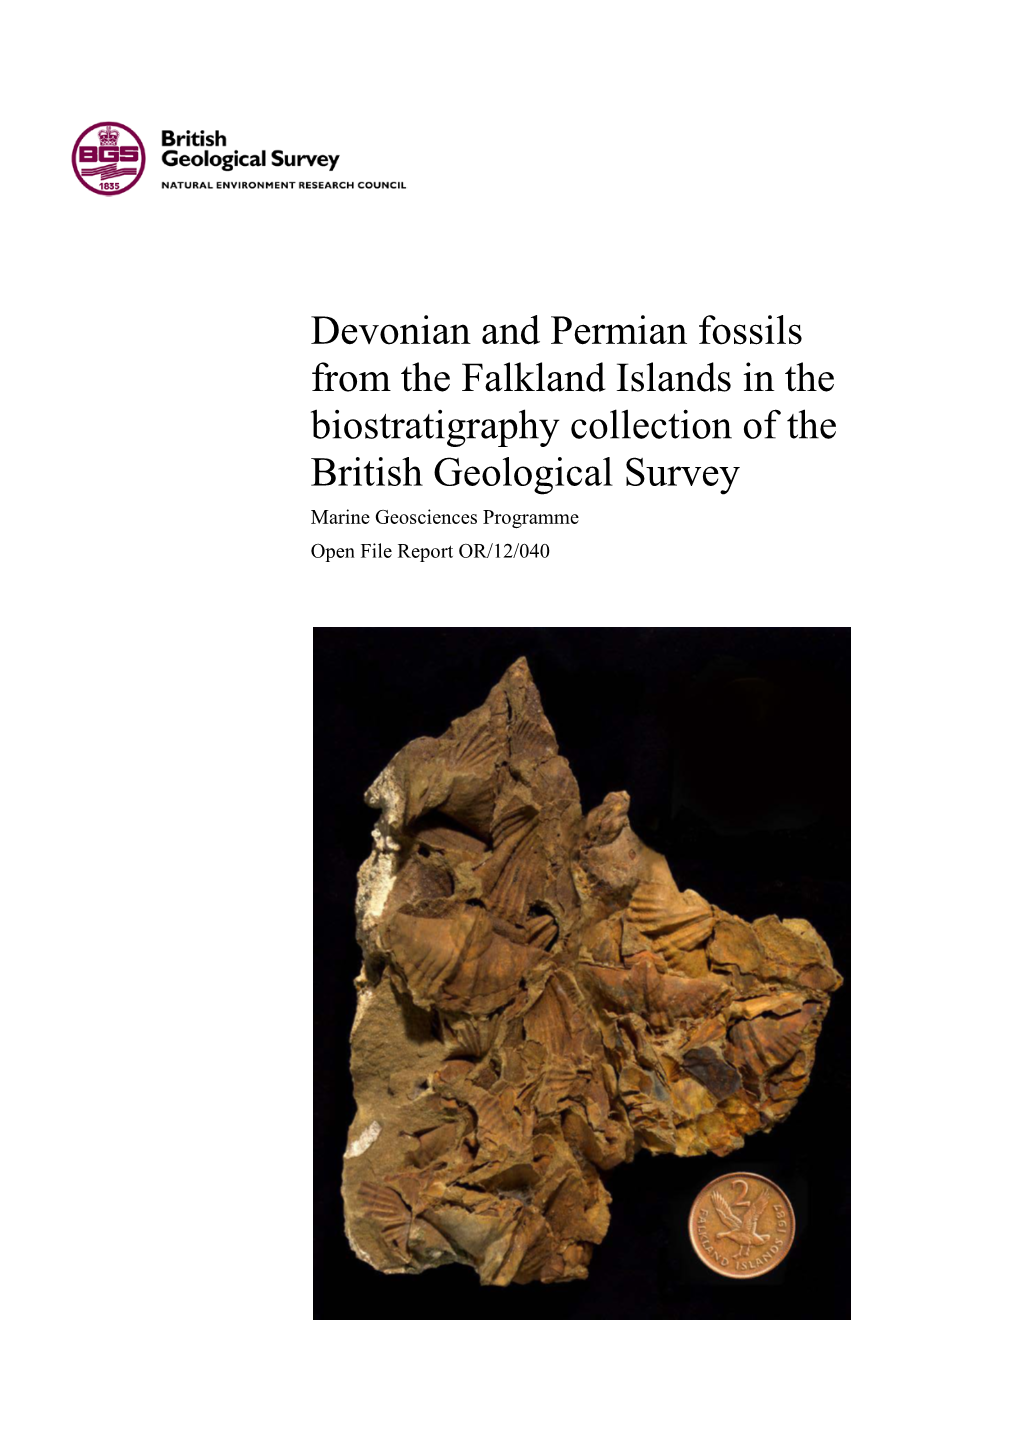 Devonian and Permian Fossils from the Falkland Islands in The